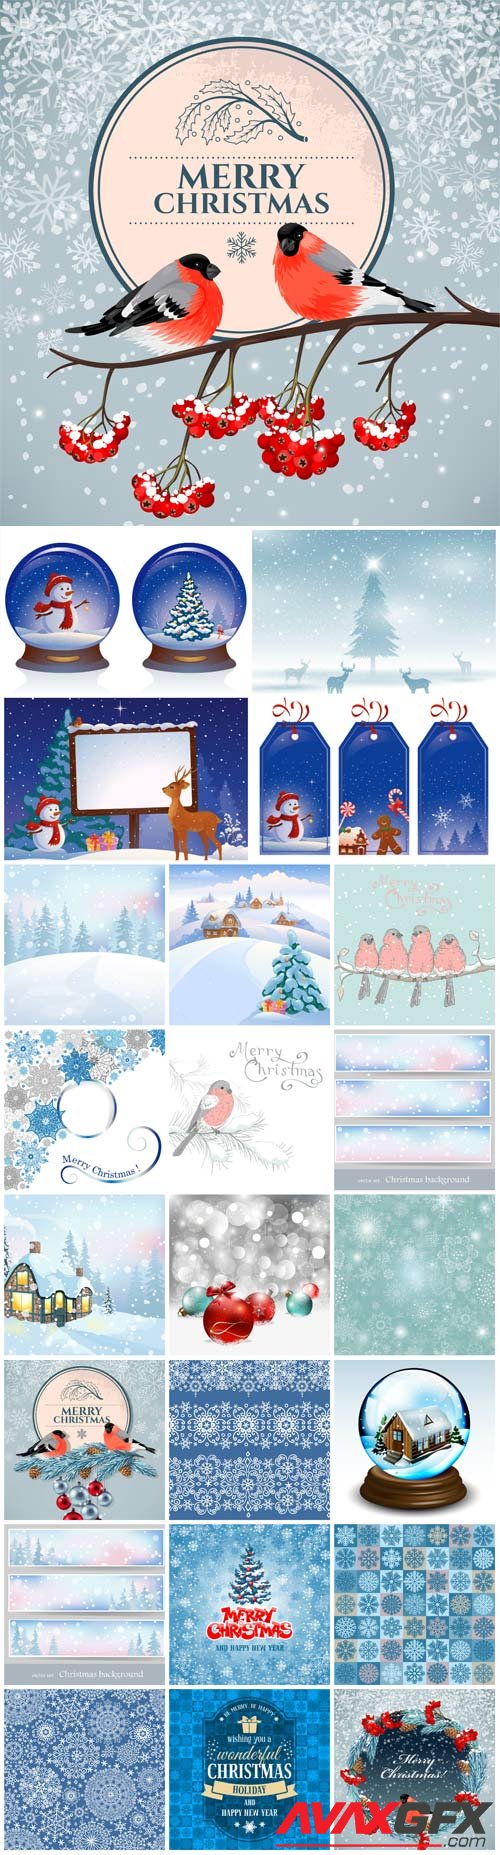 New Year and Christmas illustrations in vector №10